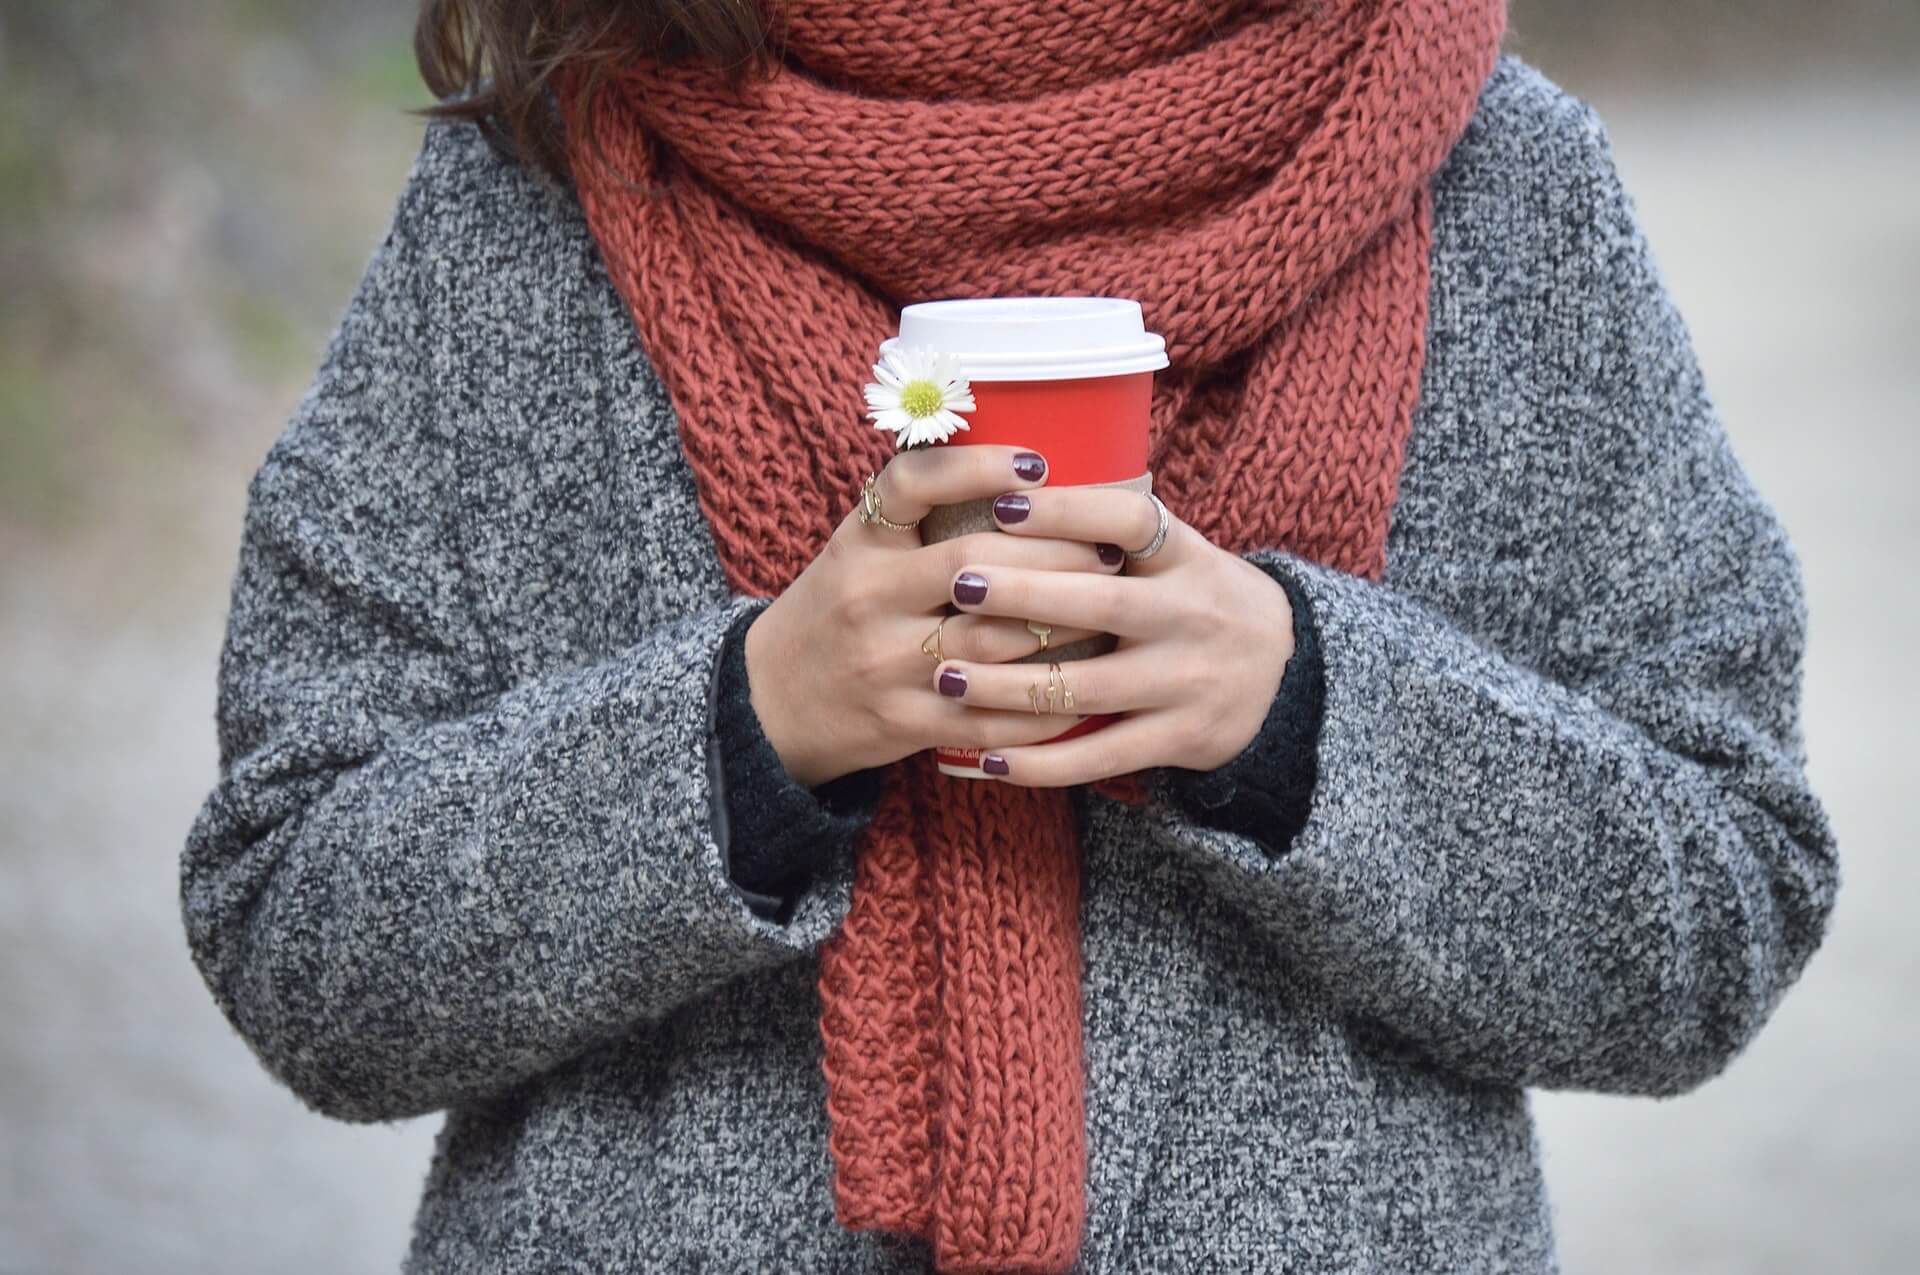 a lady holding a coffee mug, she is rugged up wearing a scarf and warm jacket